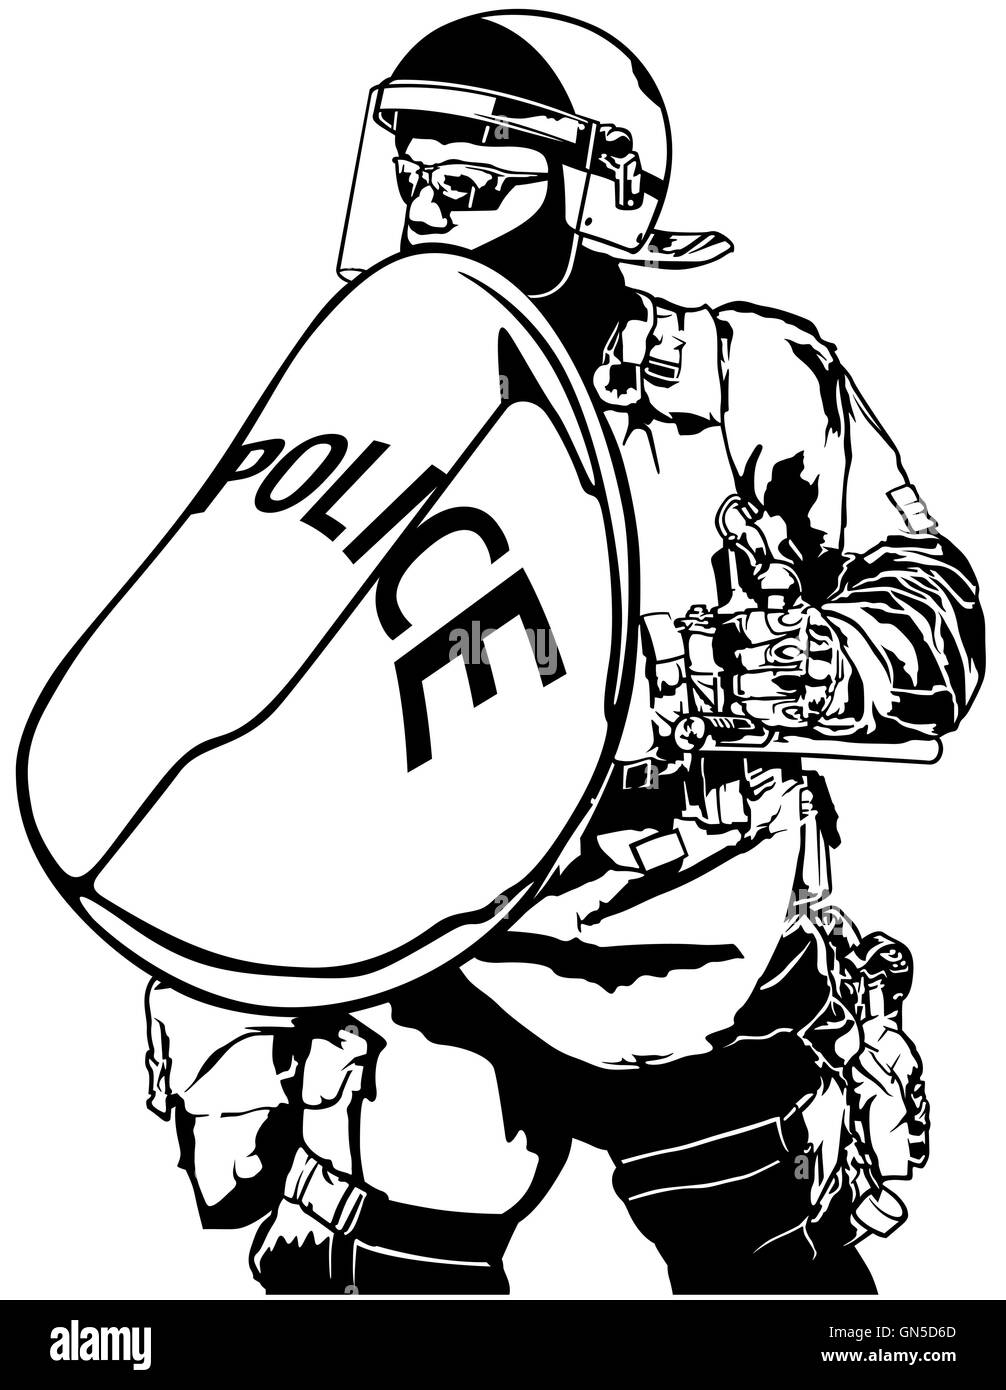 Riot police officer Black and White Stock Photos & Images - Alamy